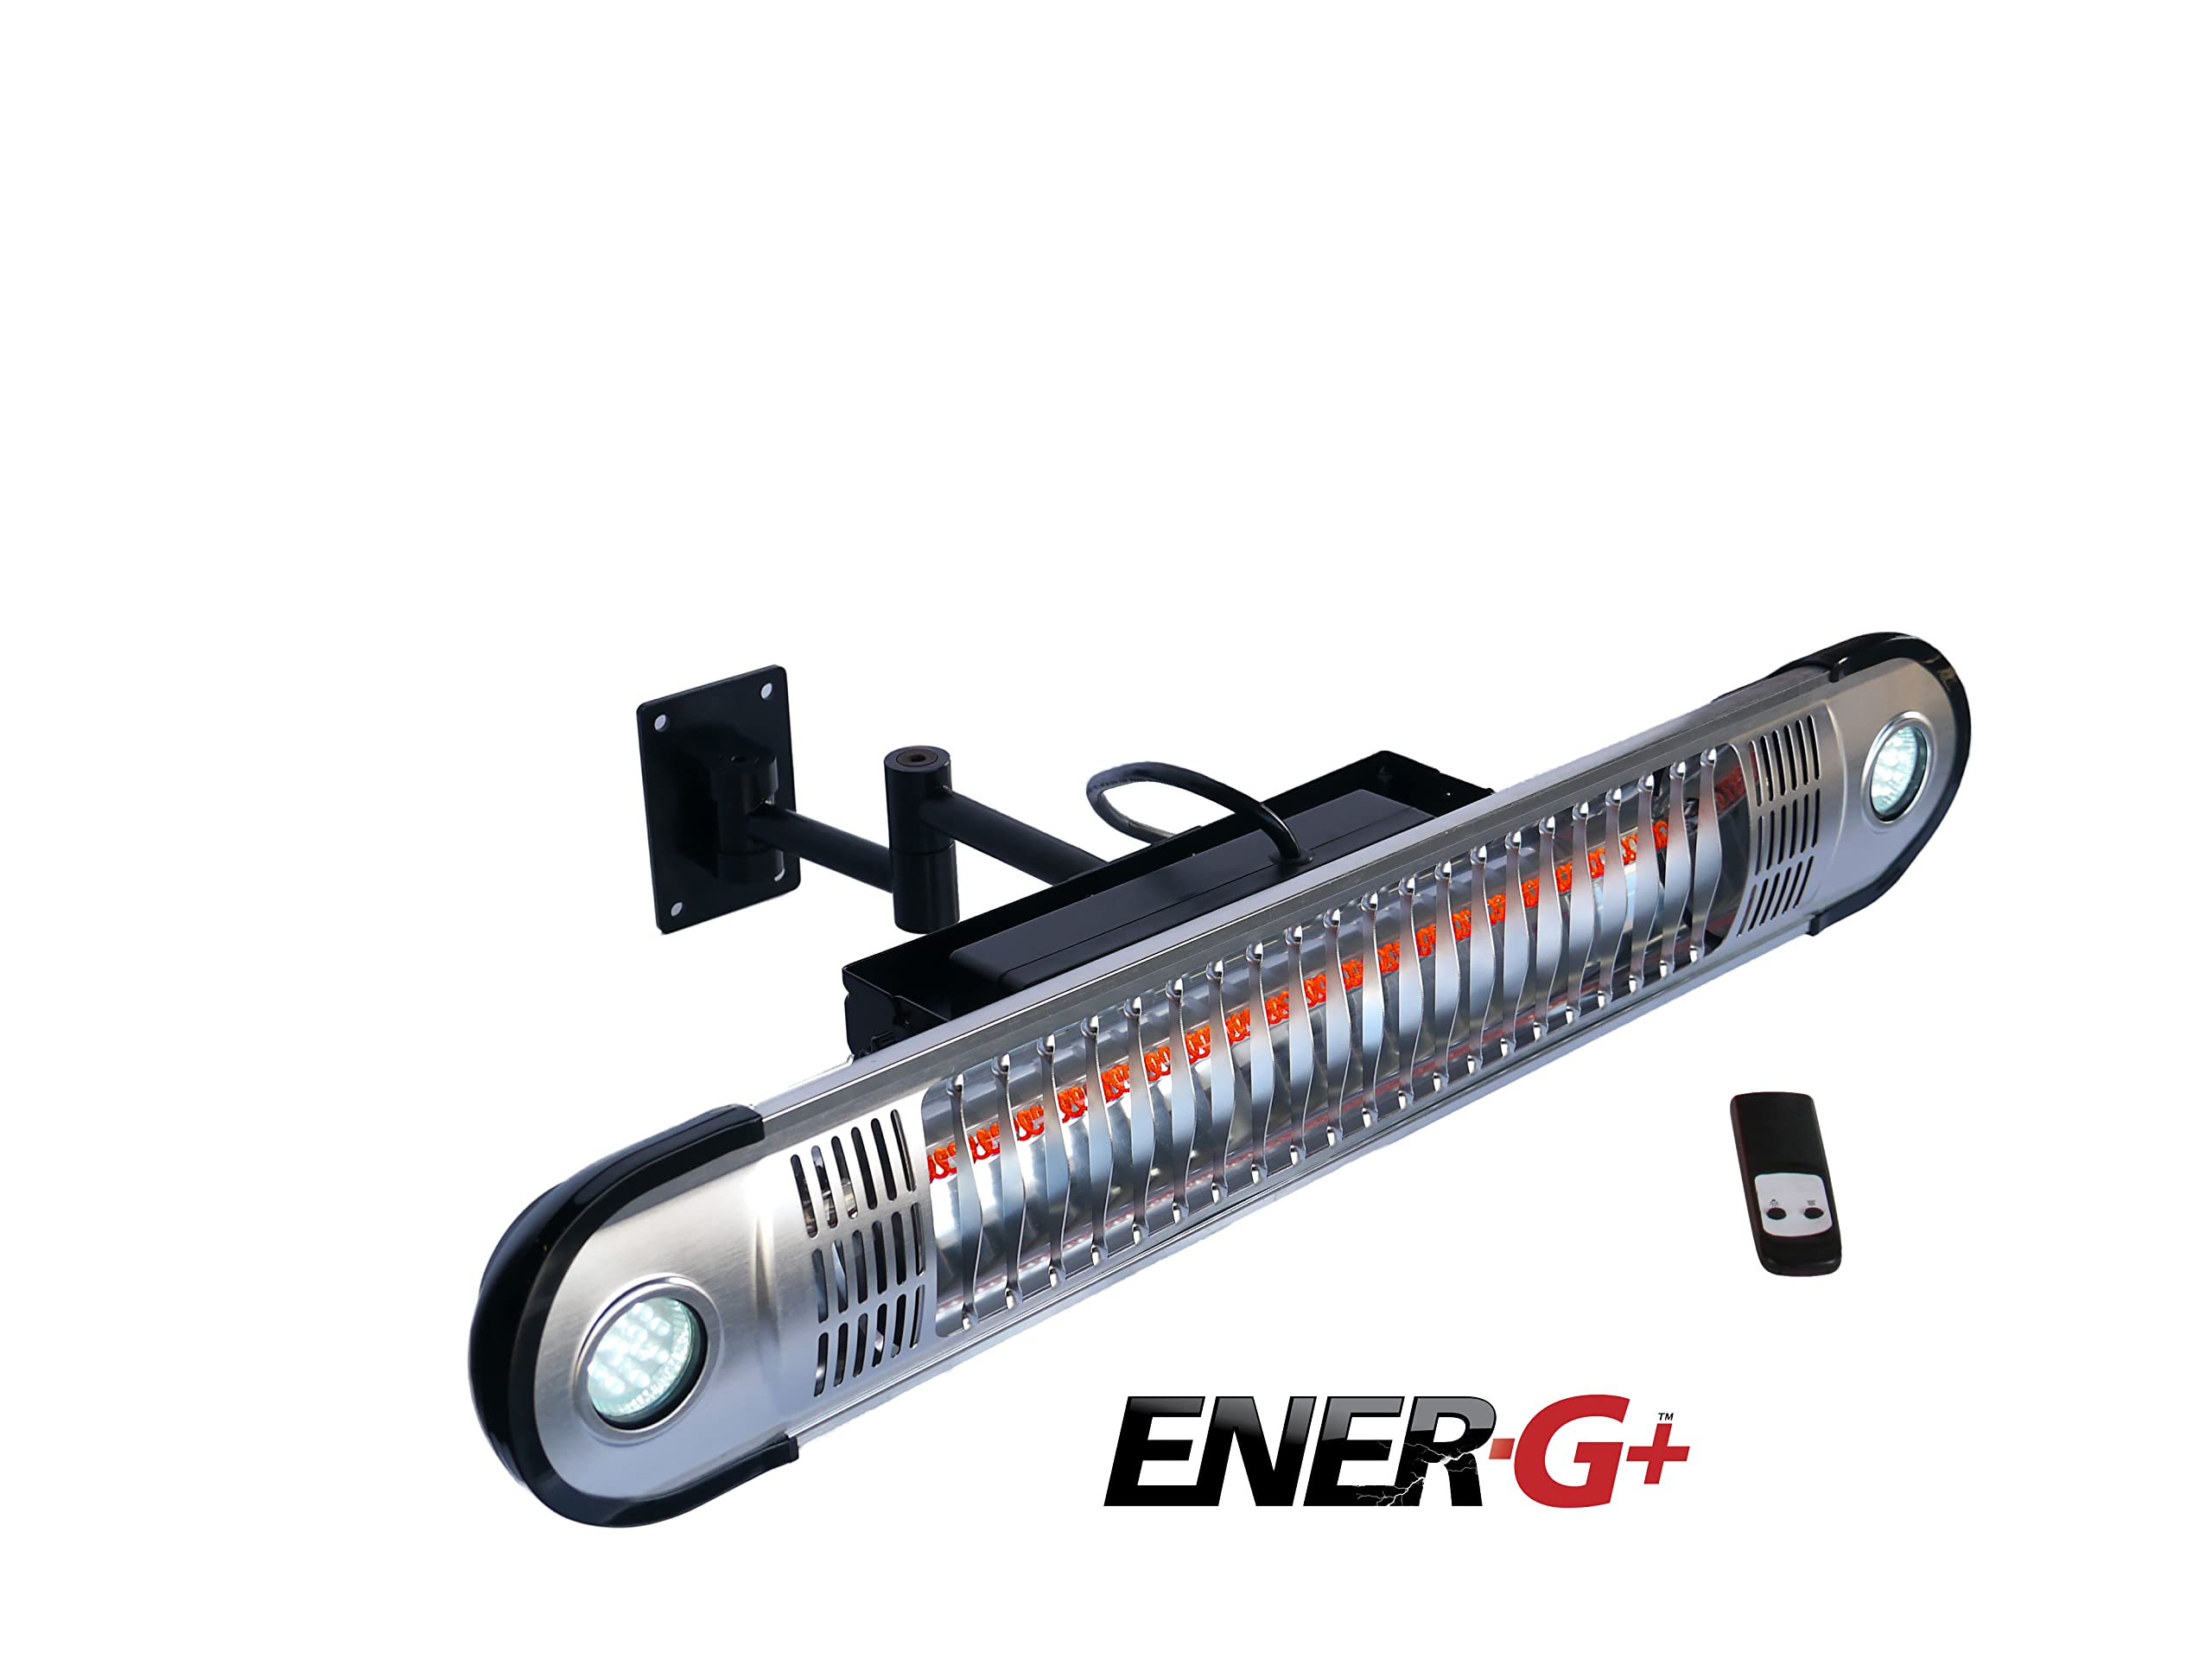 EnerG+ Infrared Electric Outdoor Heater - Wall Mounted with LED & Remote, Silver (HEA-21533)